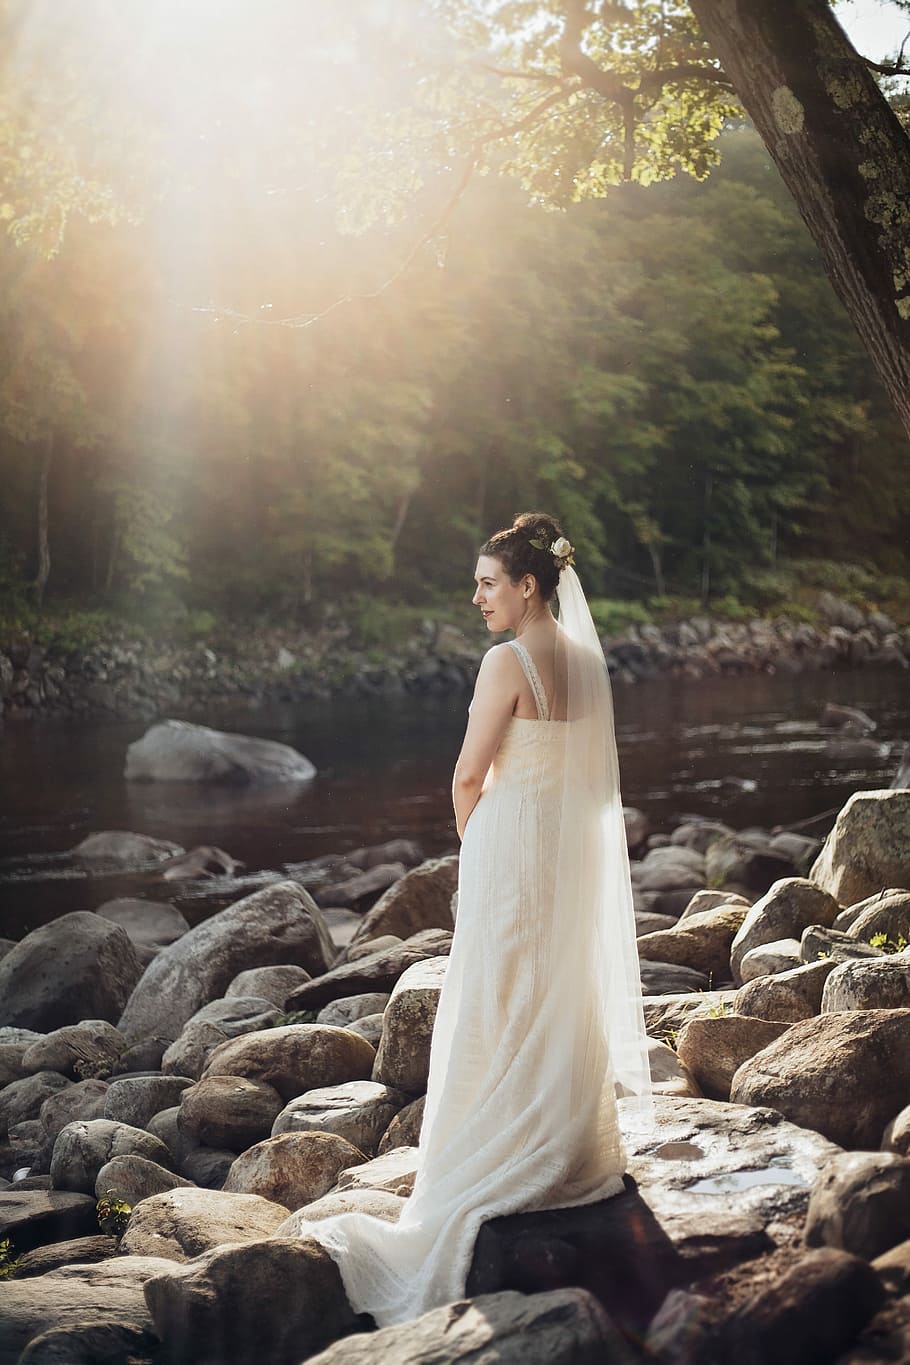 woman standing on gray rock near lake during sunset, woman wearing white sleeveless wedding gown standing on rocks near body of water